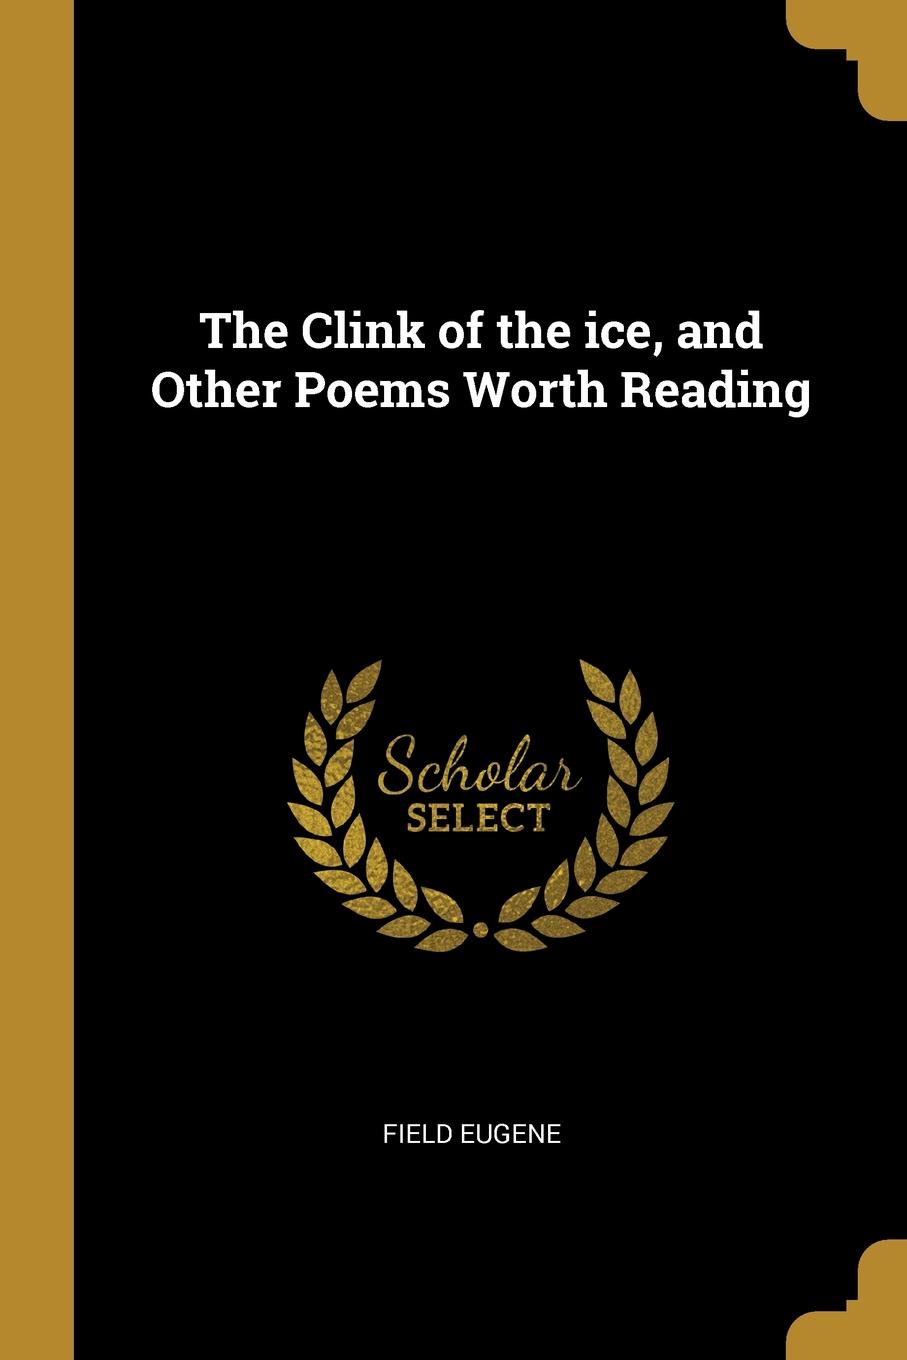 The Clink of the ice, and Other Poems Worth Reading